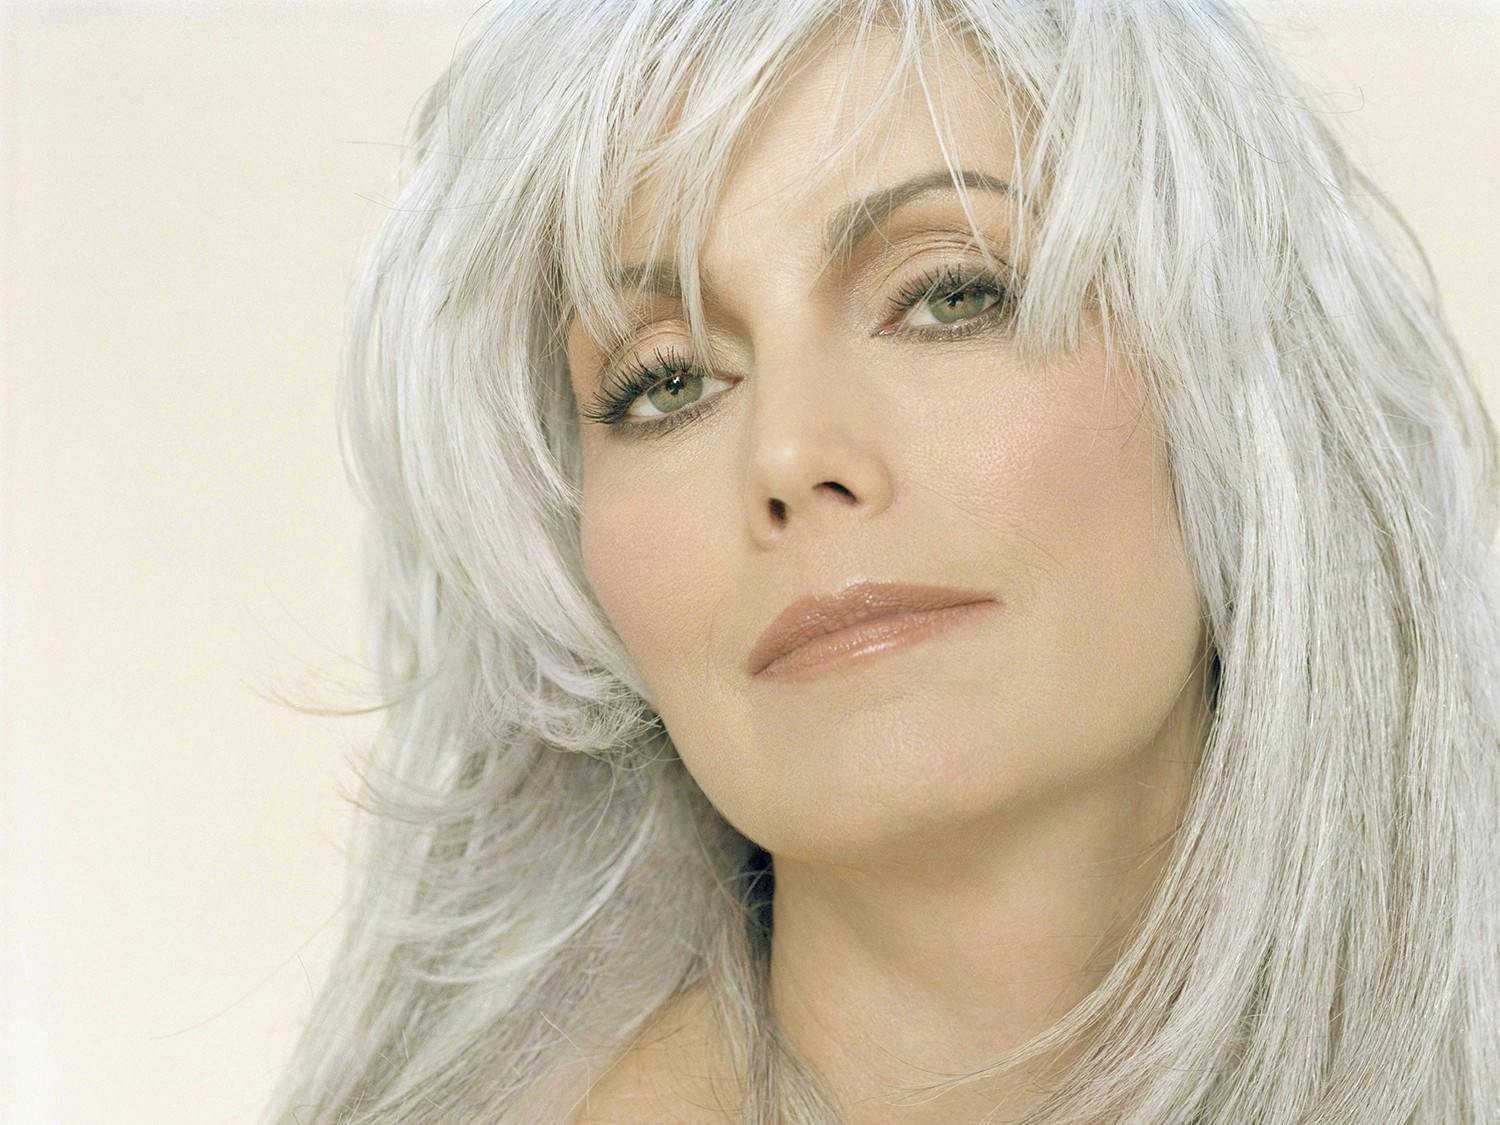 Emmylou Harris will perform at Memorial Hall, hosted by Carolina Performing Arts, on Friday, Nov. 8, 2019. Photo courtesy of Veronique Rolland.&nbsp;